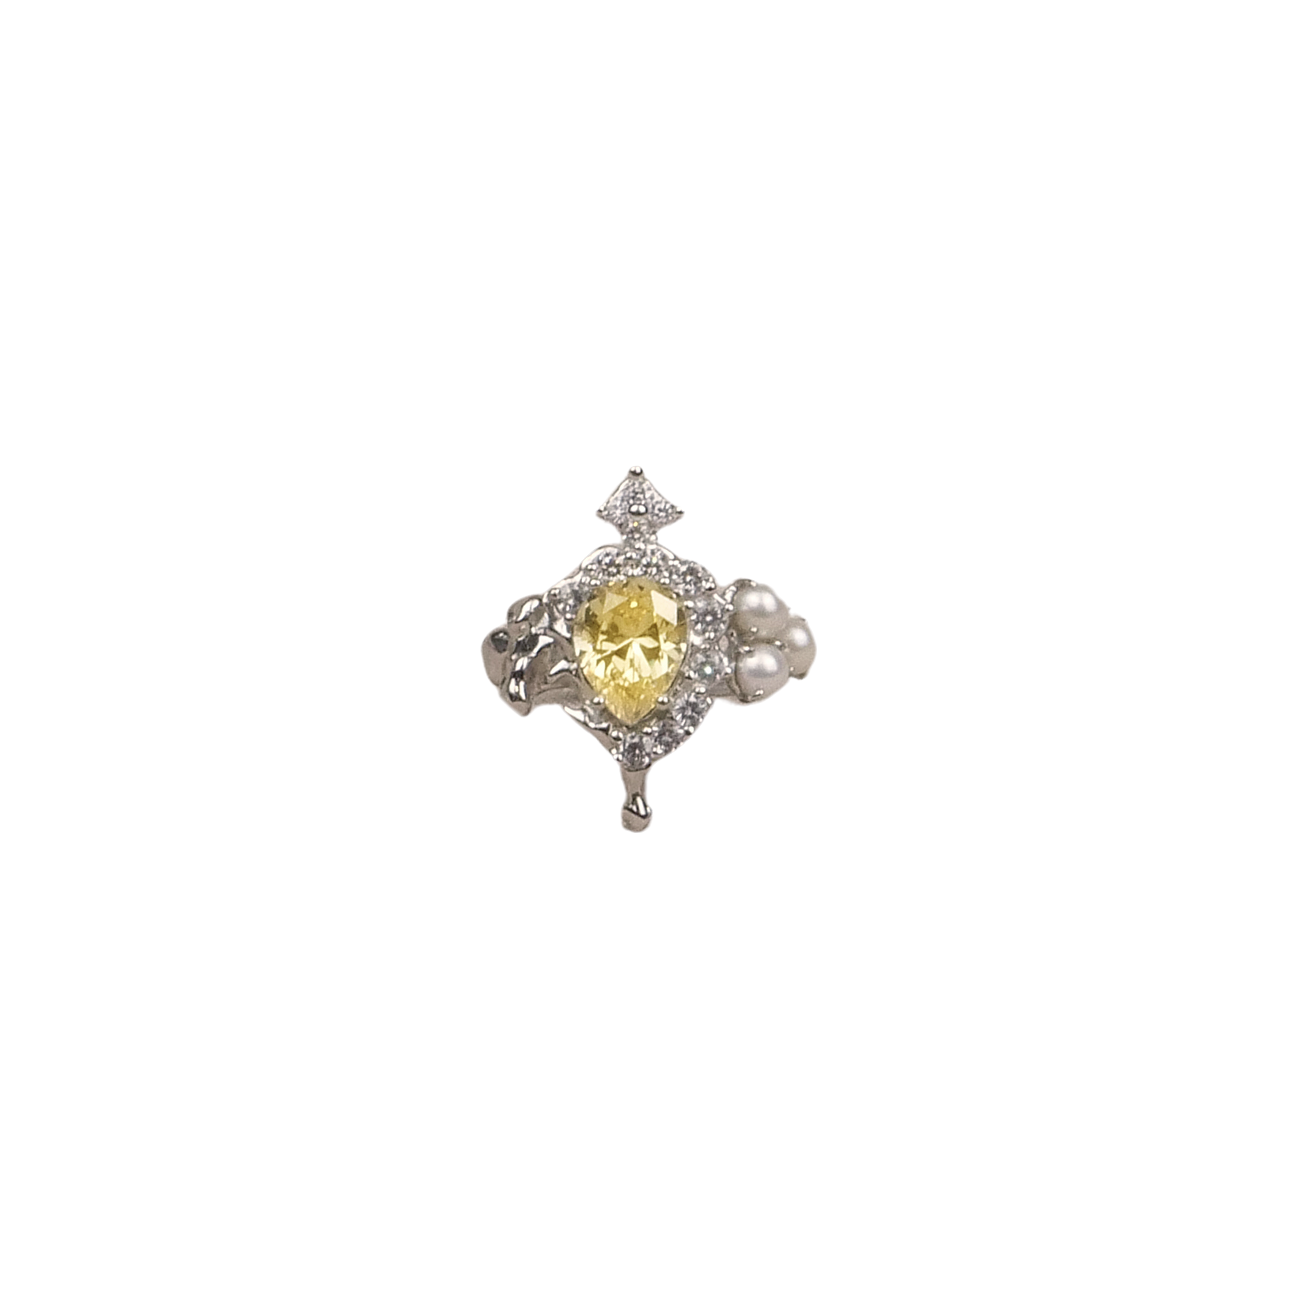 Hanying Melted Pearl Ring With Zircon (Light Yellow)